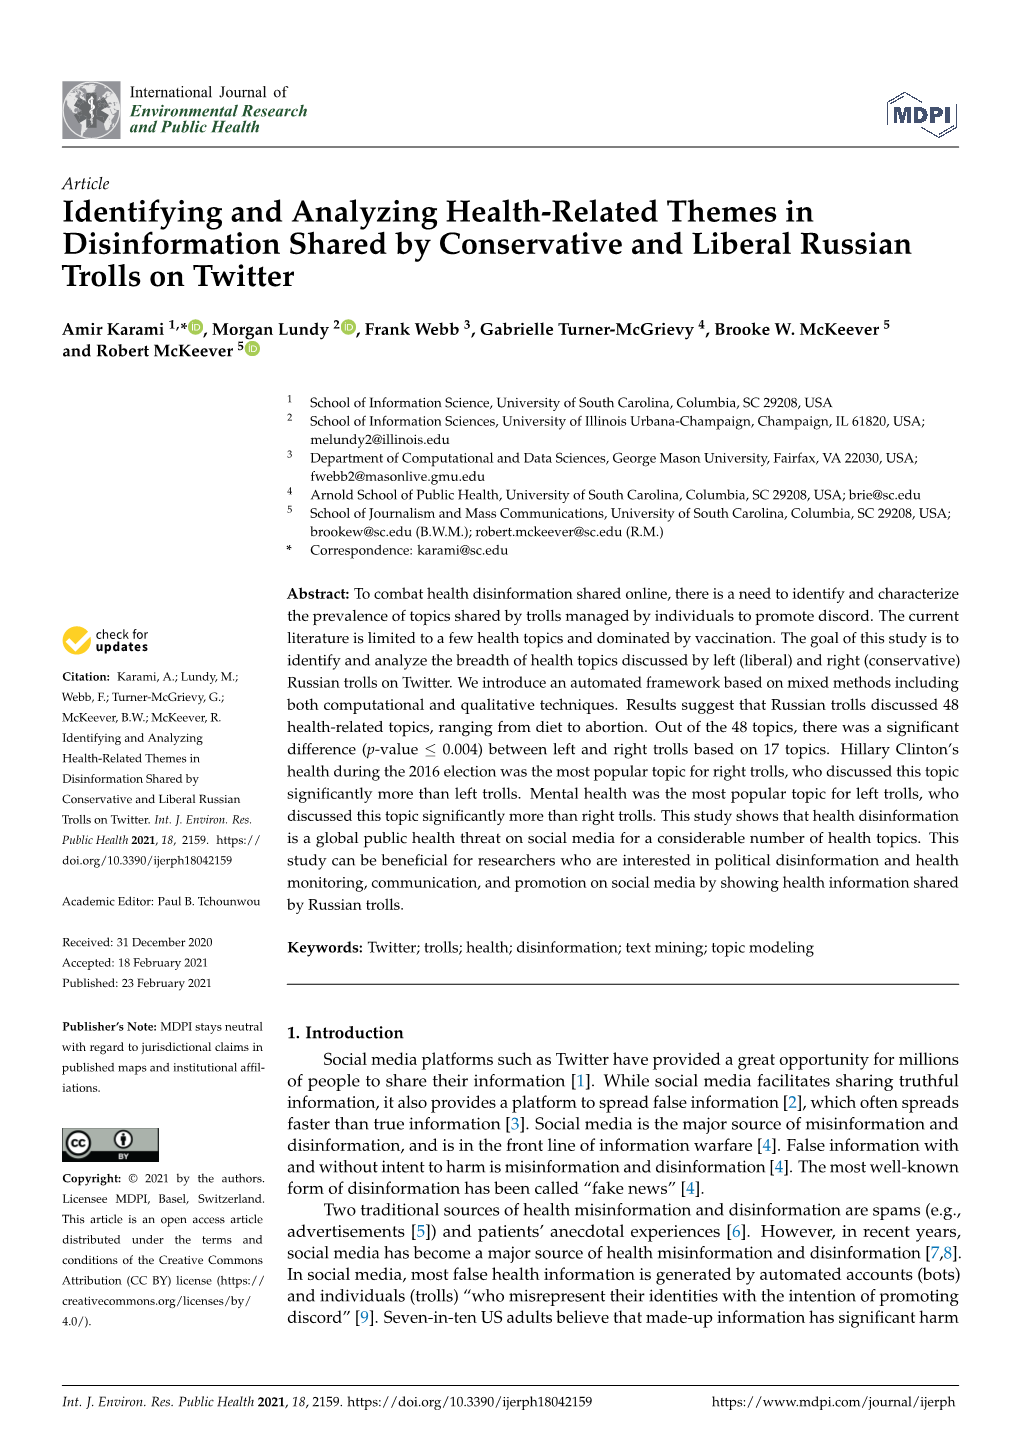 Identifying and Analyzing Health-Related Themes in Disinformation Shared by Conservative and Liberal Russian Trolls on Twitter